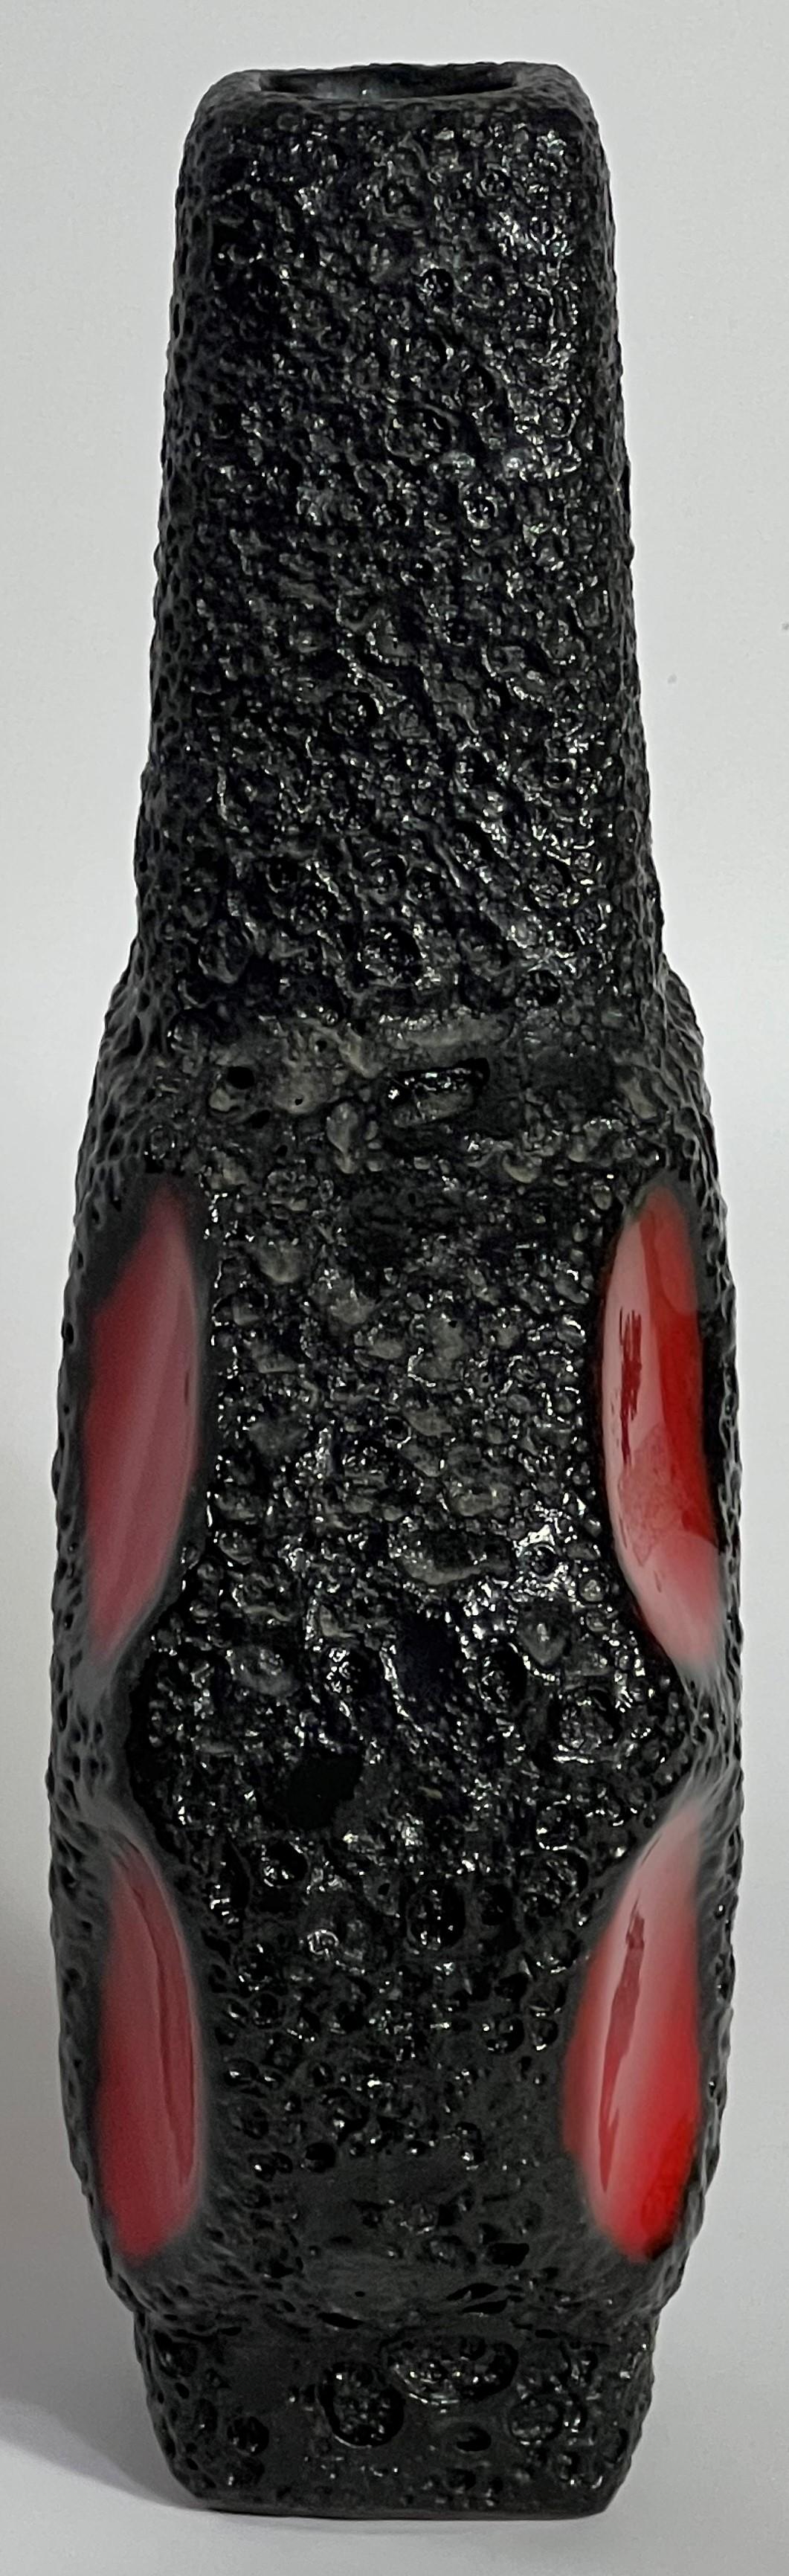 The banjo vase from Roth Keramik is among the most collected Fat Lava pottery forms. And, this bright red and black volcanic is stunning. The rich glaze complements the dark brick red clay to extraordinary effect. The banjo is a feature of many mid